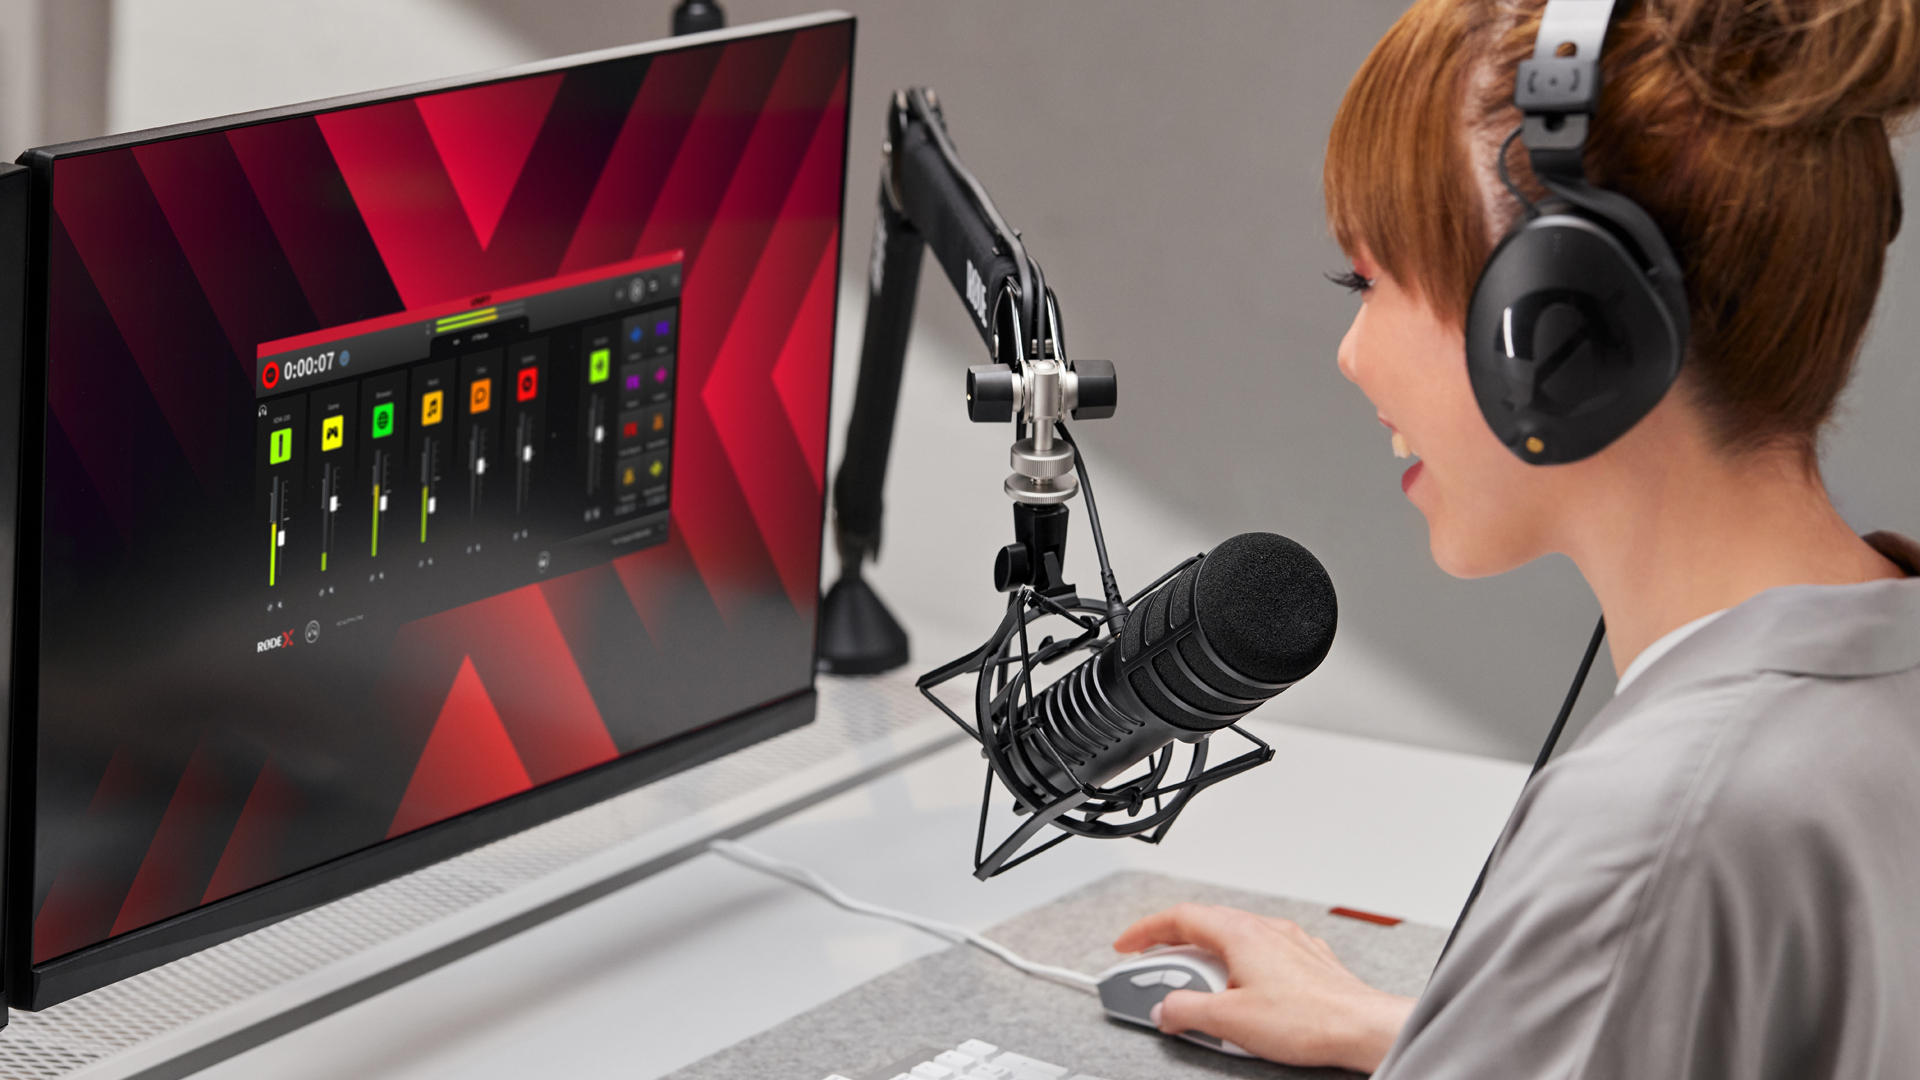 RØDE unveils UNIFY software, 2 new mics and a sub-brand: RØDE X 10